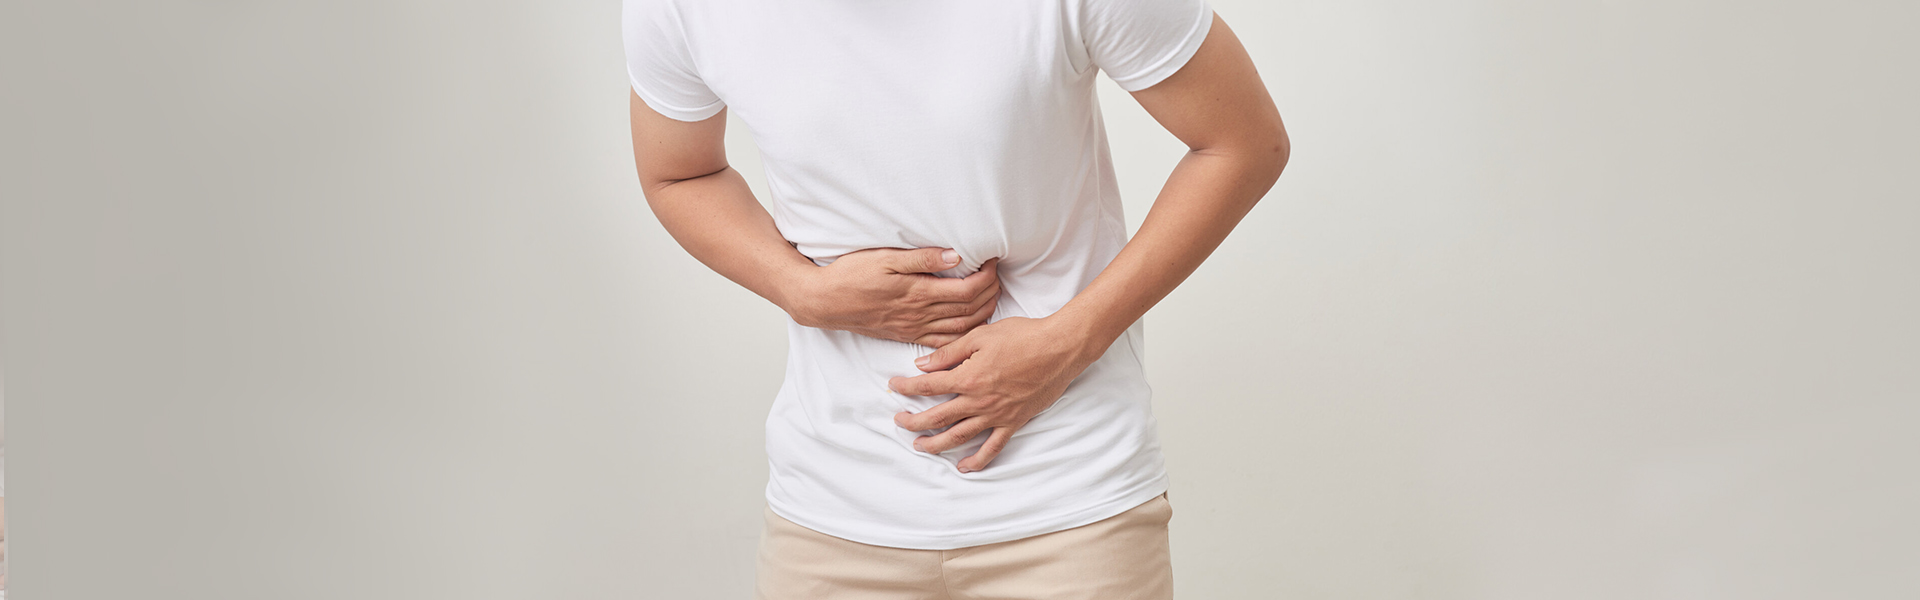 Abdominal Pain Symptoms, Causes, and Treatment